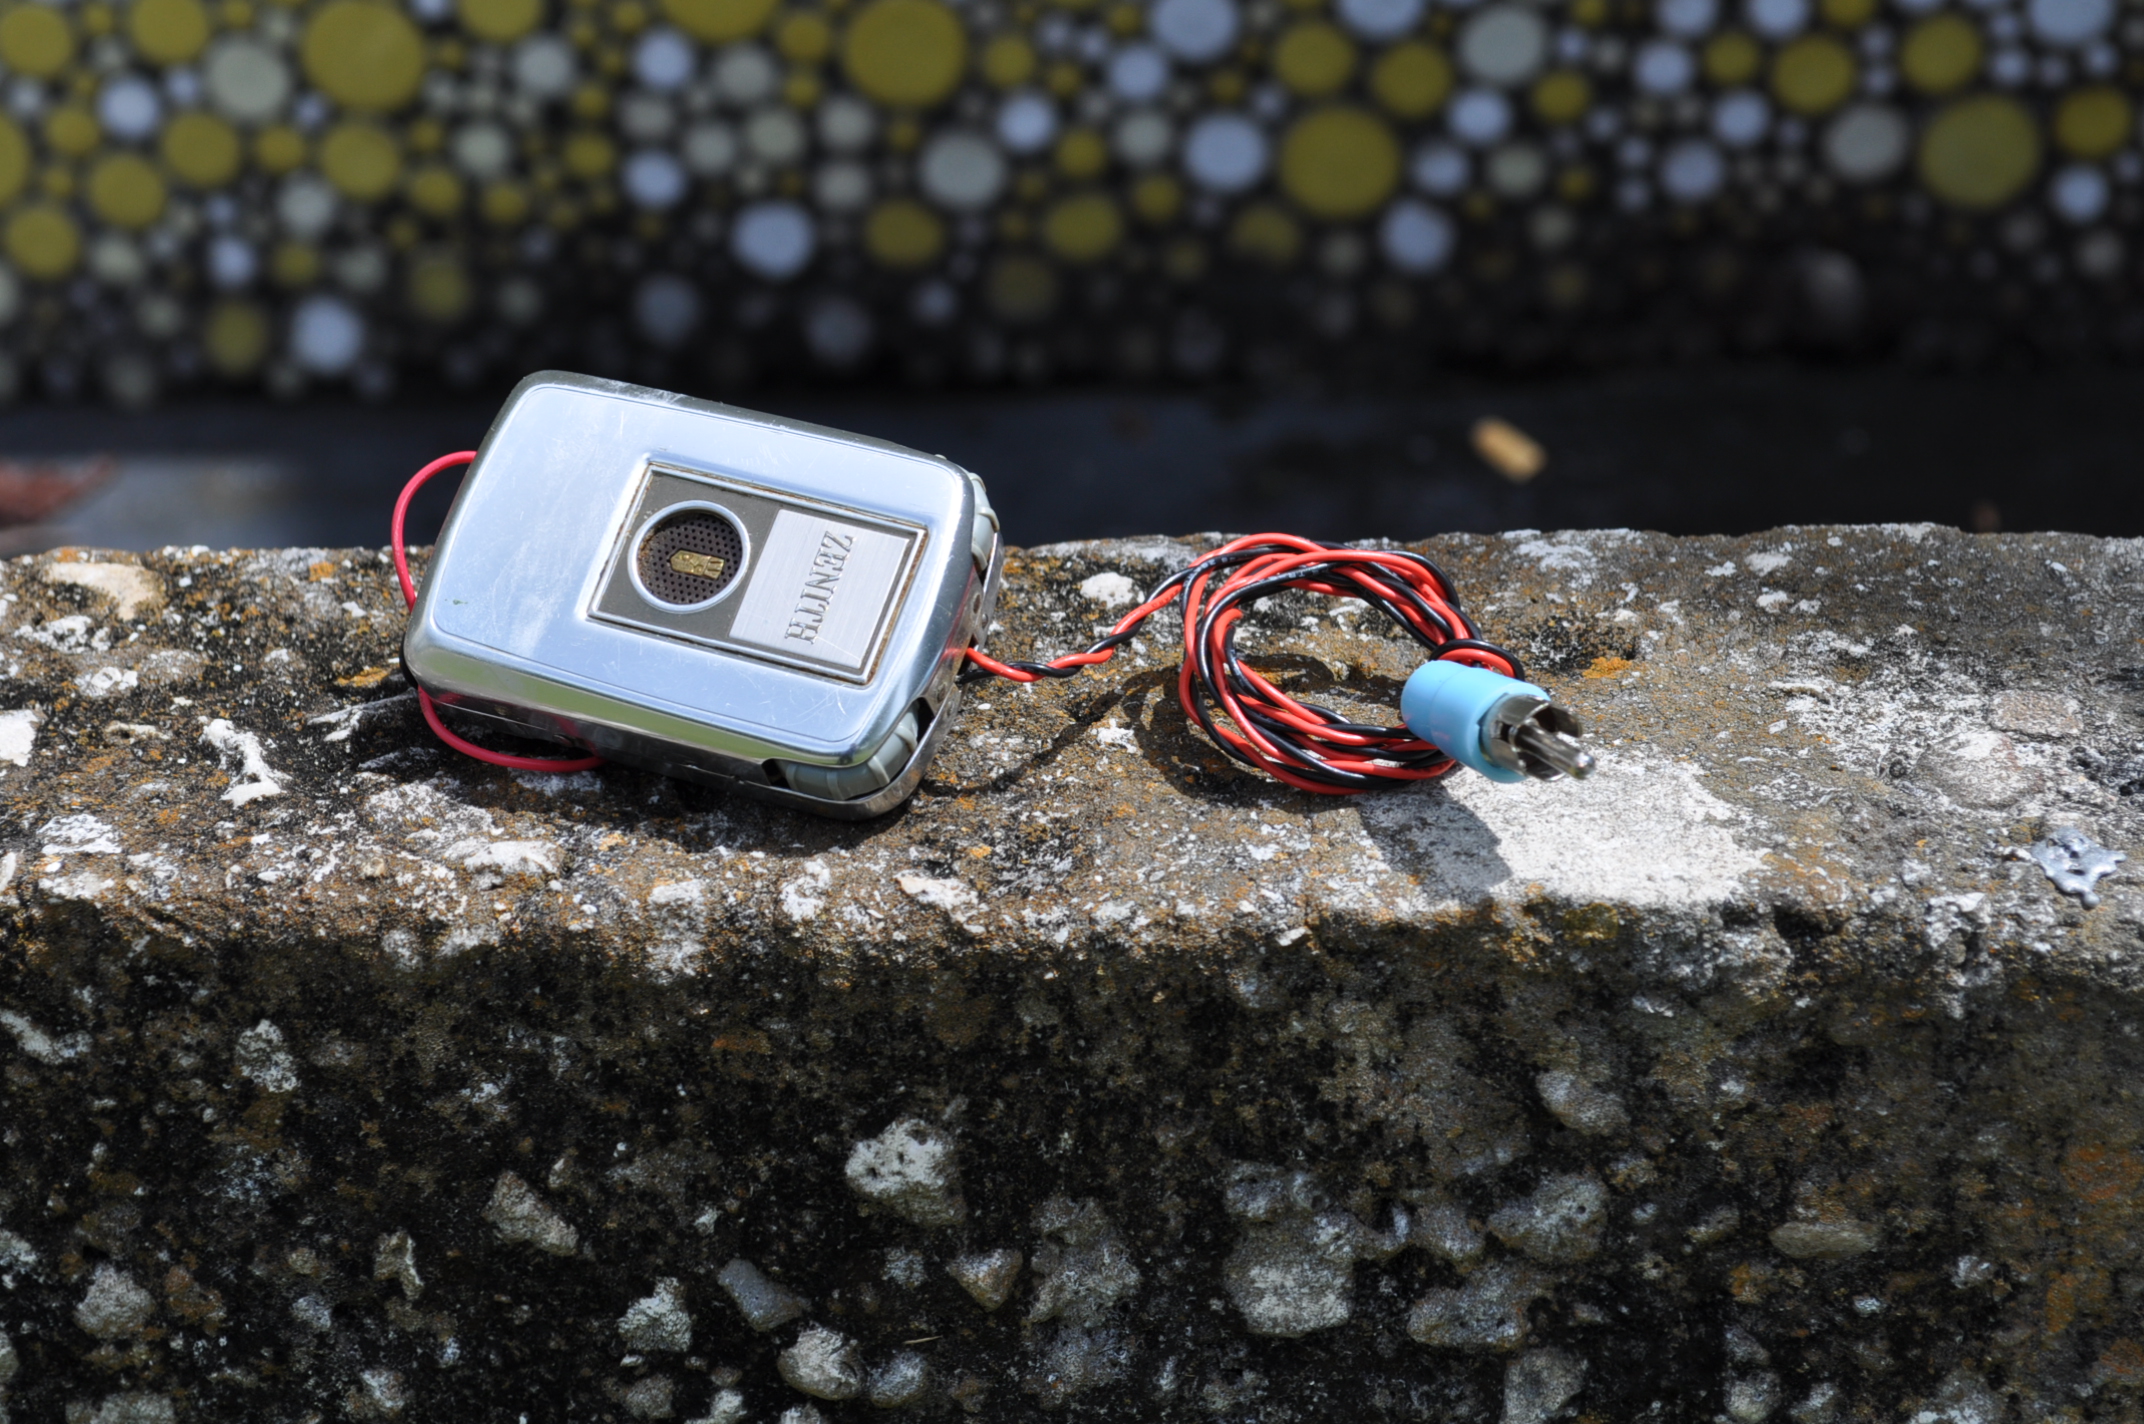 Turn a Vintage Transistor Hearing Aid Into an Amplified Microphone for Nostalgic Sound